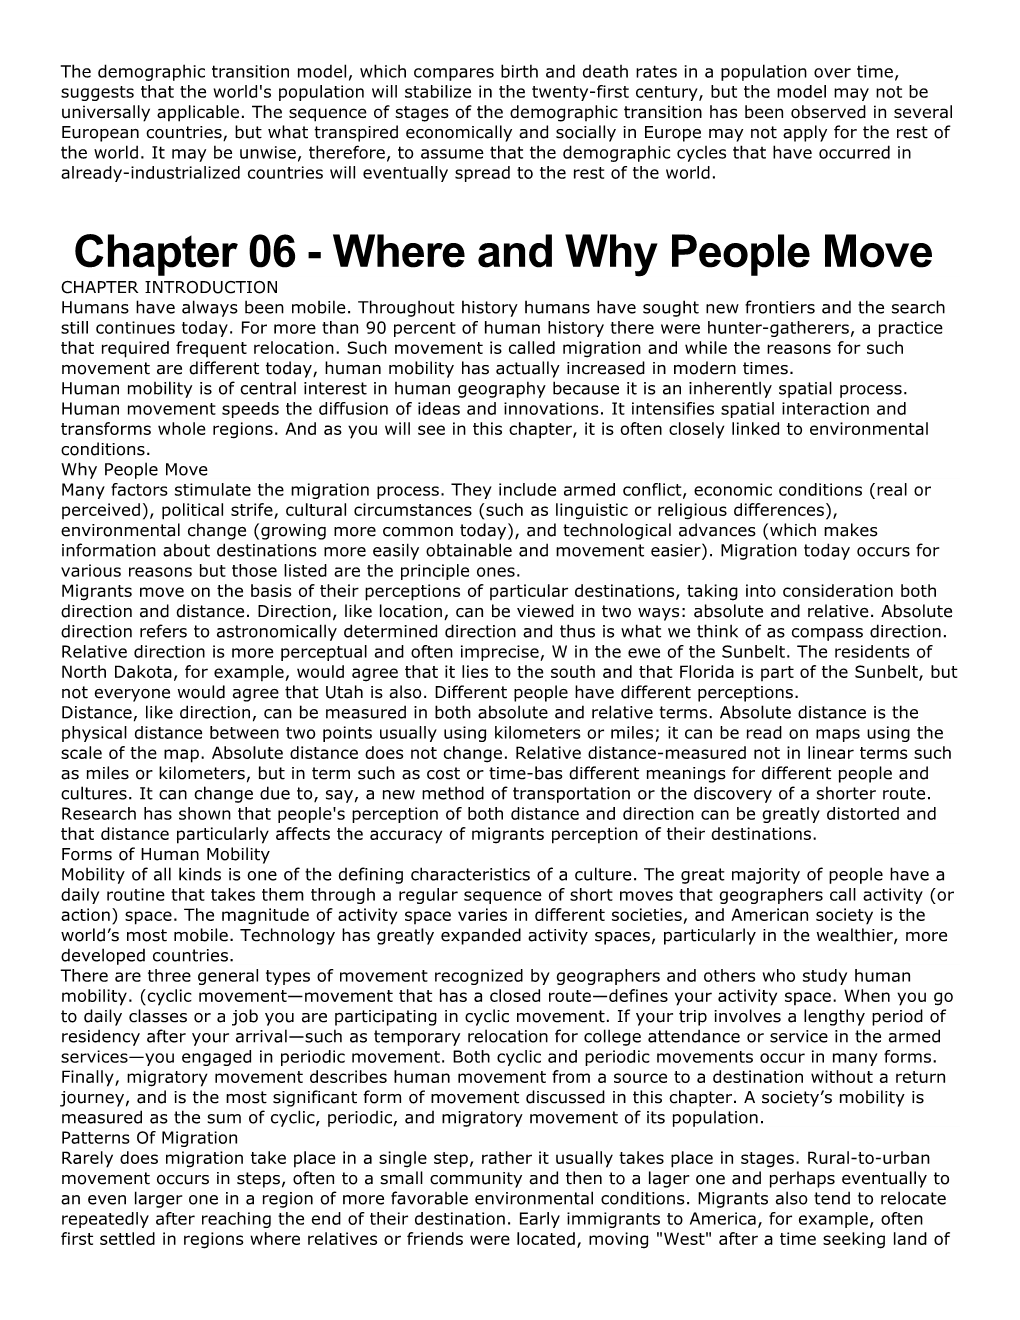 Chapter 04 - Fundamentals of Population: Location, Distribution and Density